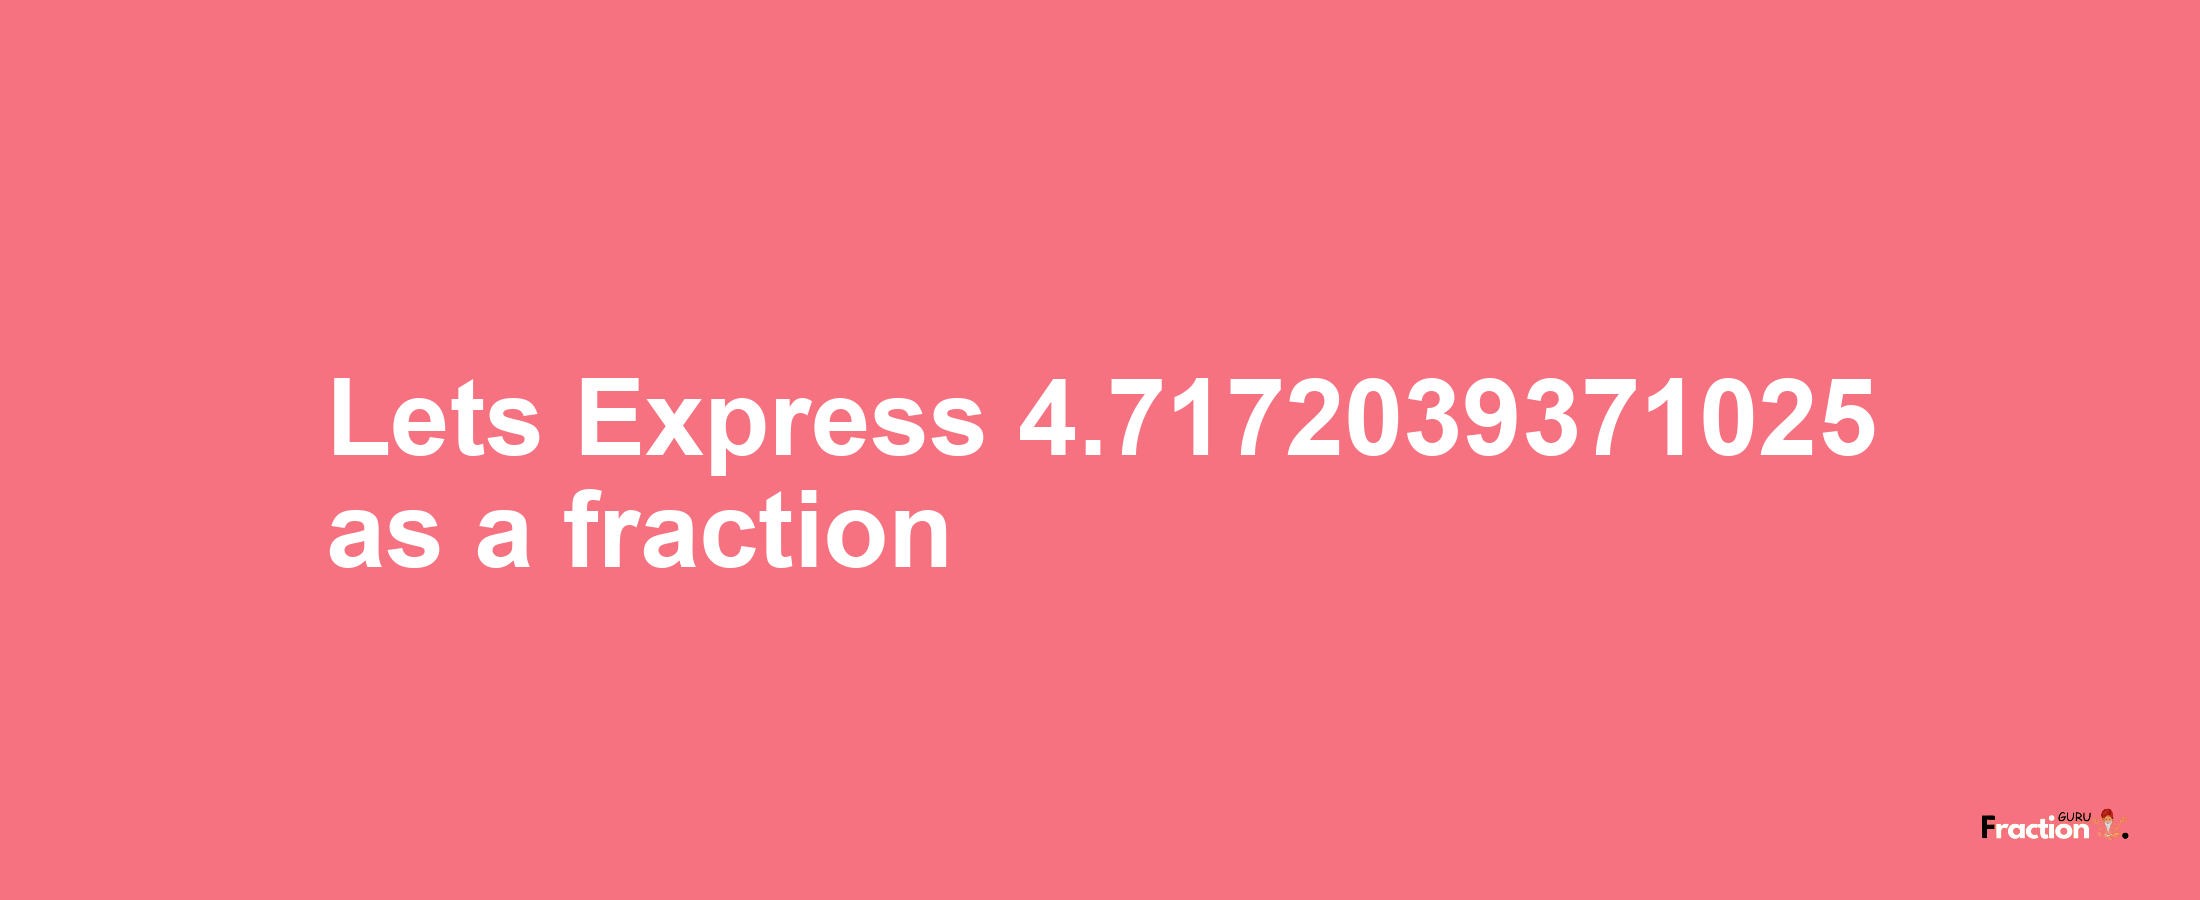 Lets Express 4.7172039371025 as afraction